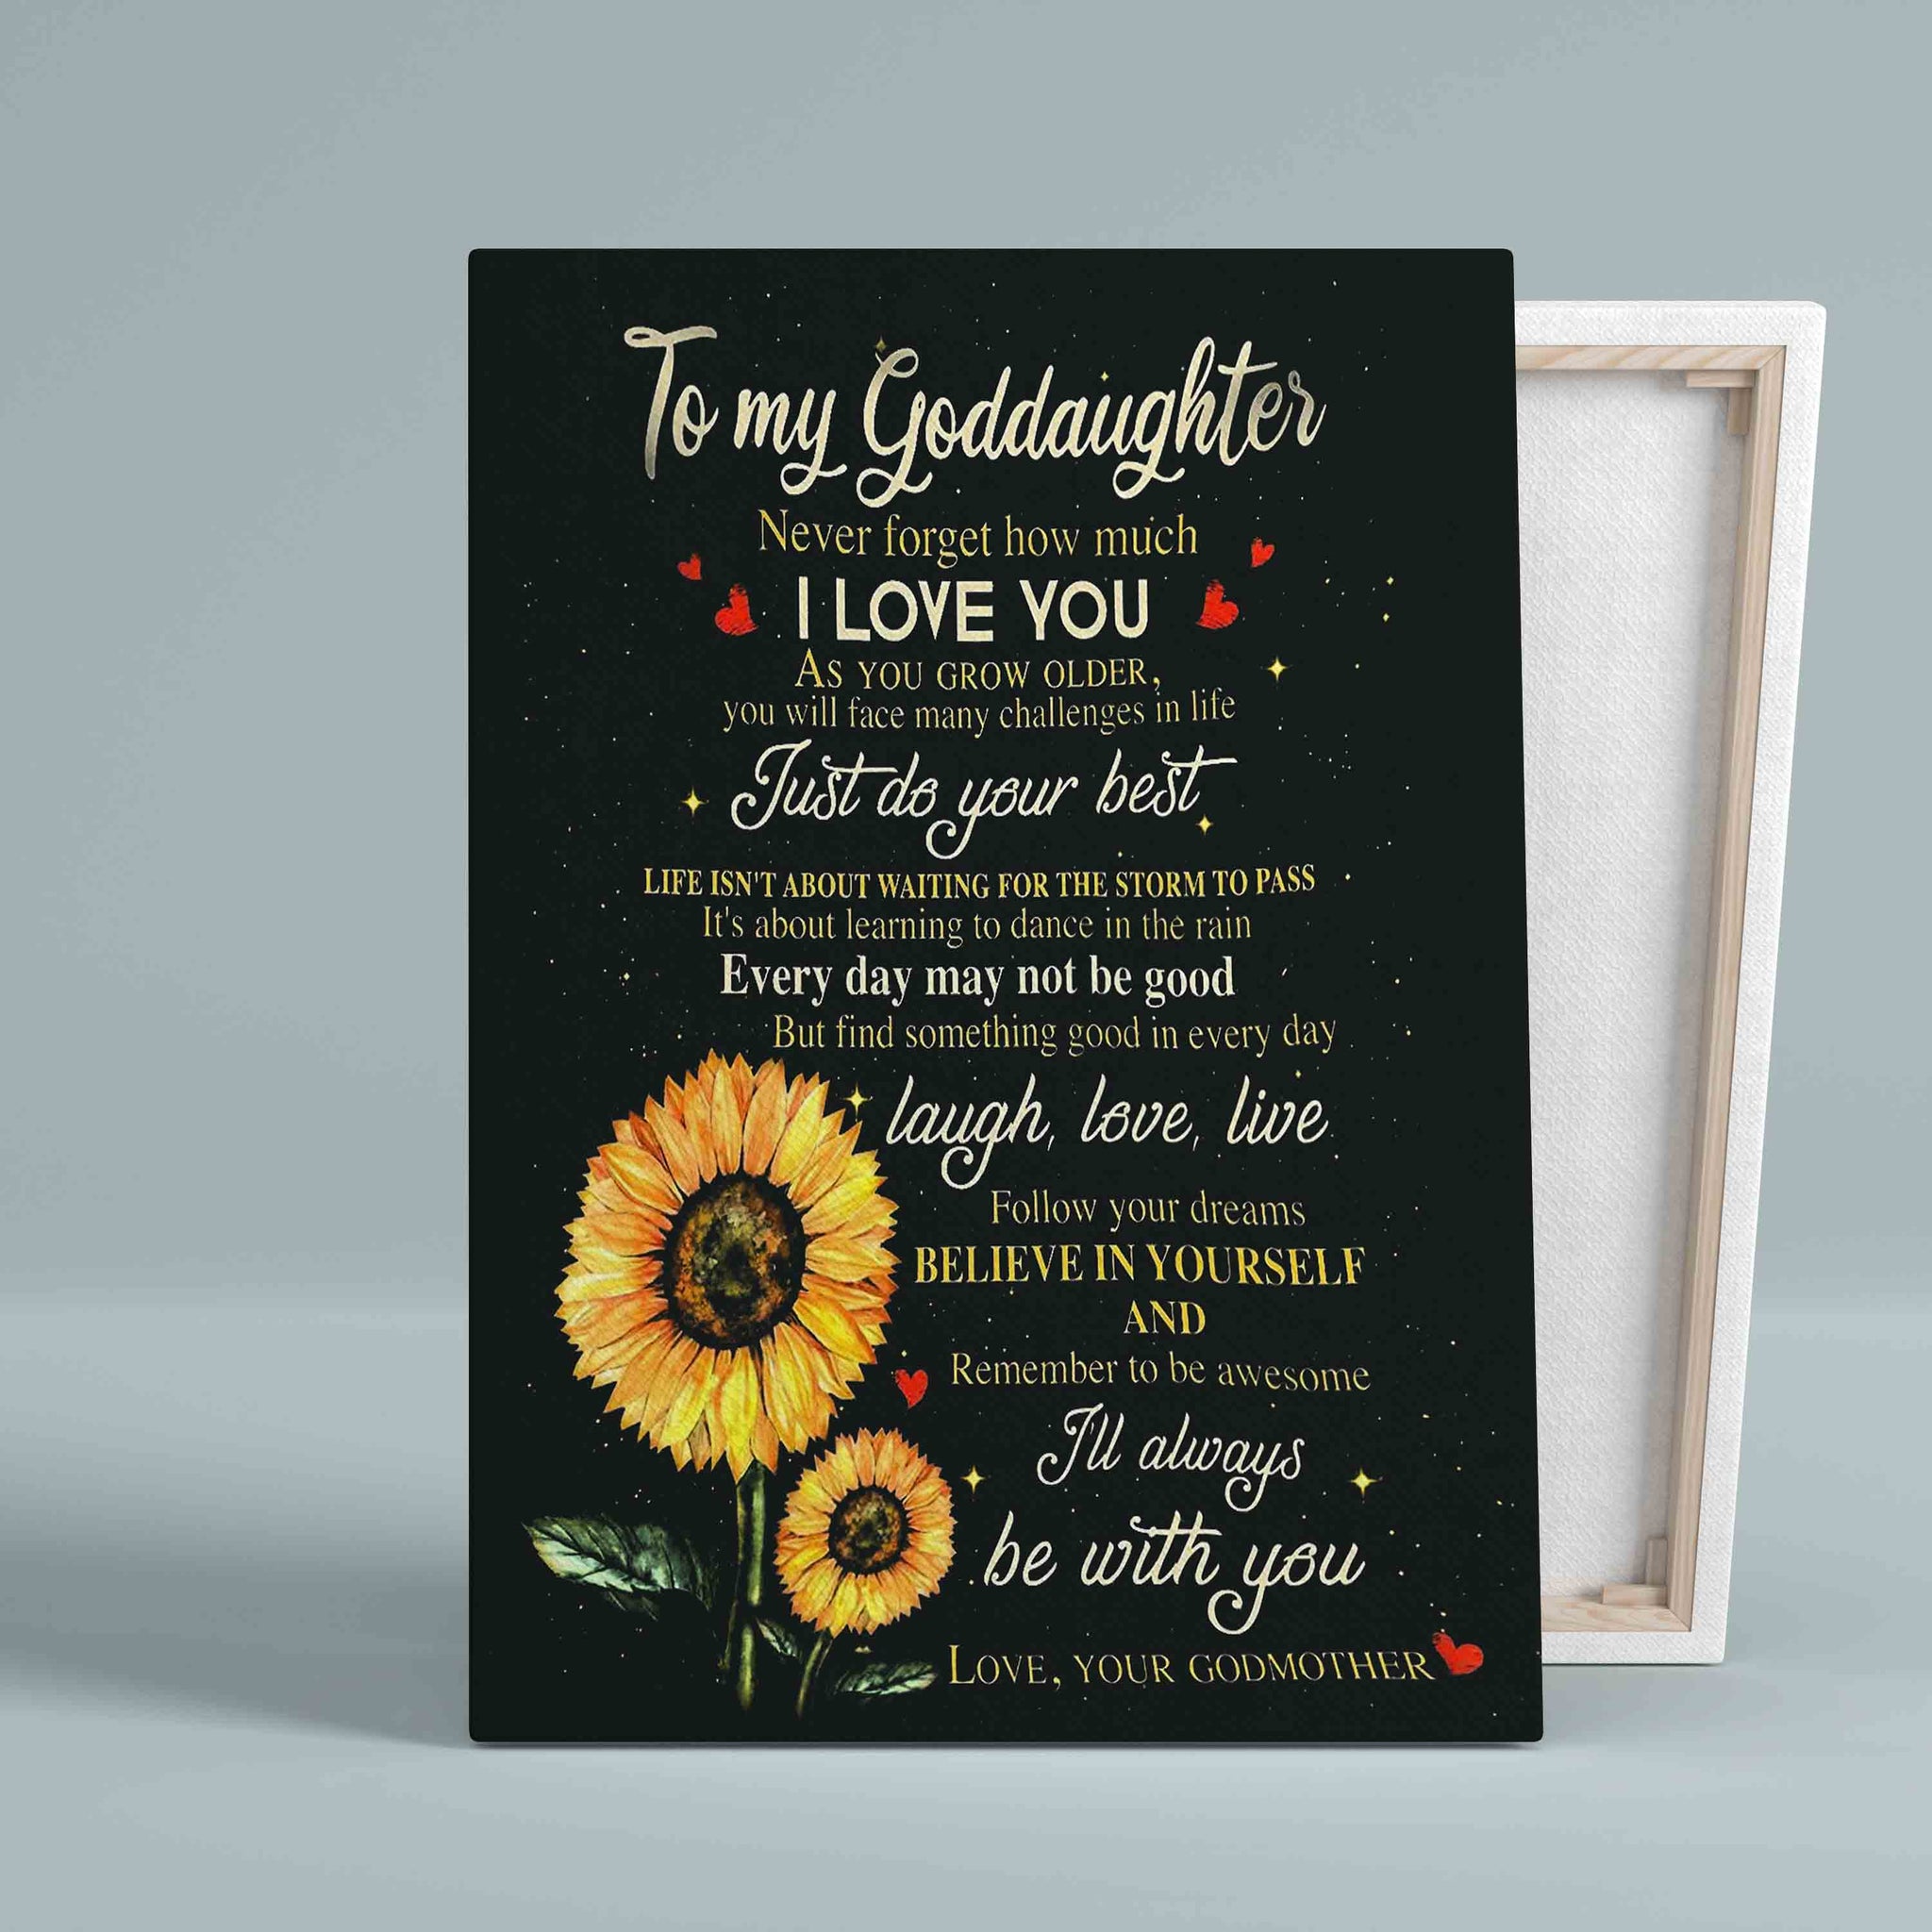 To My Goddaughter Canvas, Love Quote Canvas, Family Canvas, Sunflower Canvas